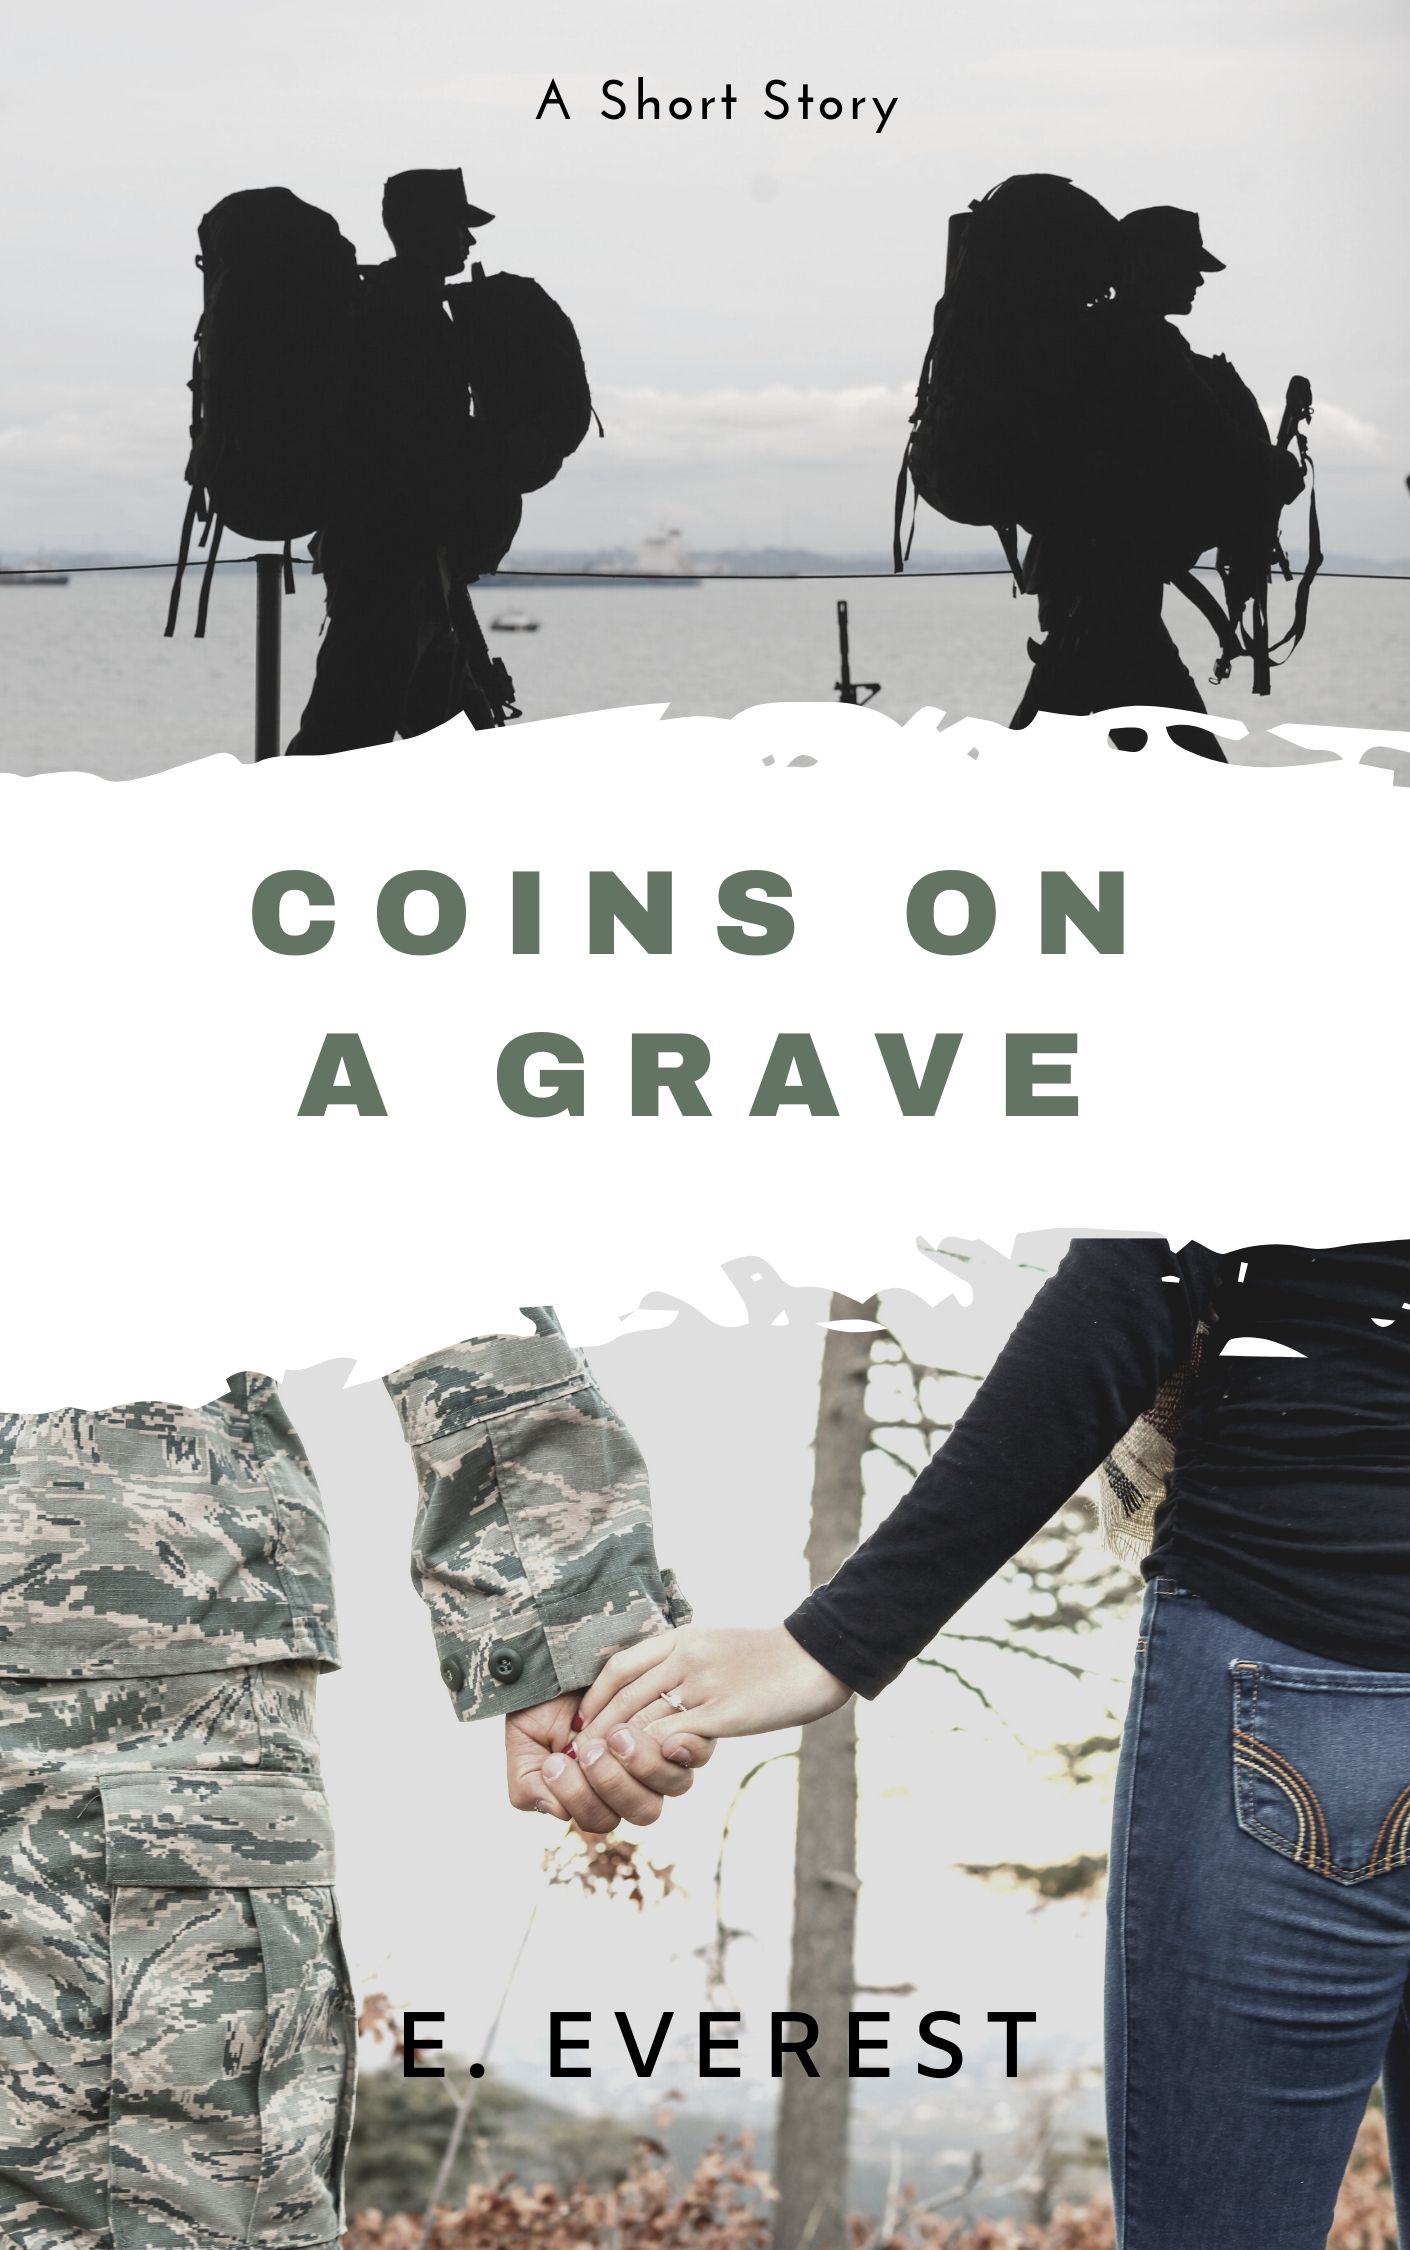 FREE: Coins on a Grave by E. Everest